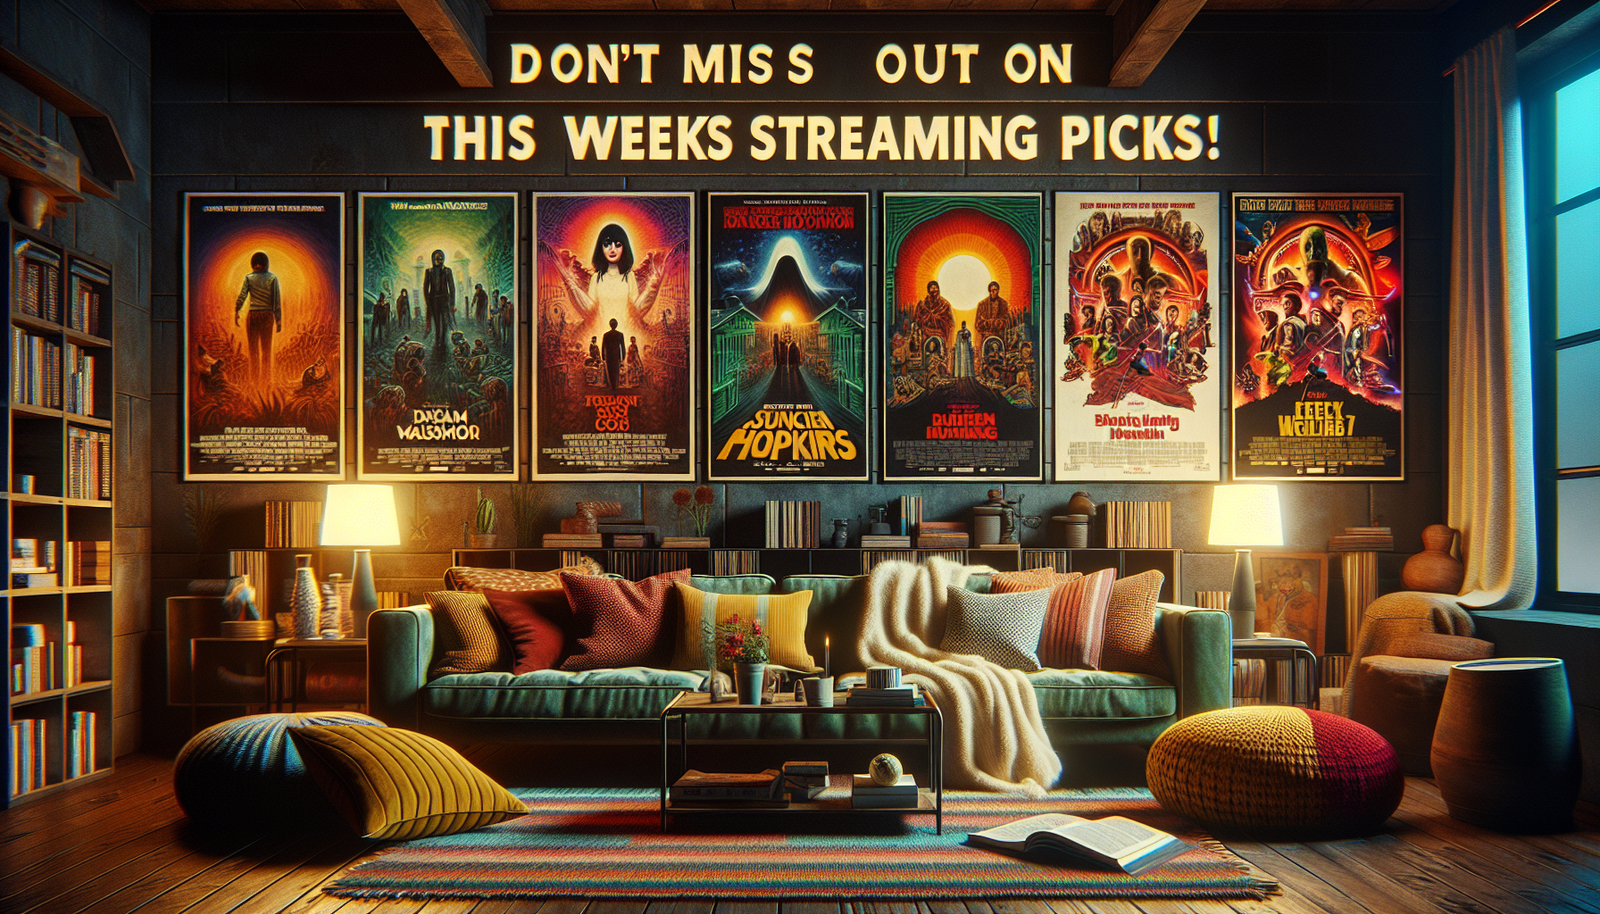 discover the 7 new movies that will redefine your movie-watching experience. explore this week's streaming picks and don't miss out!